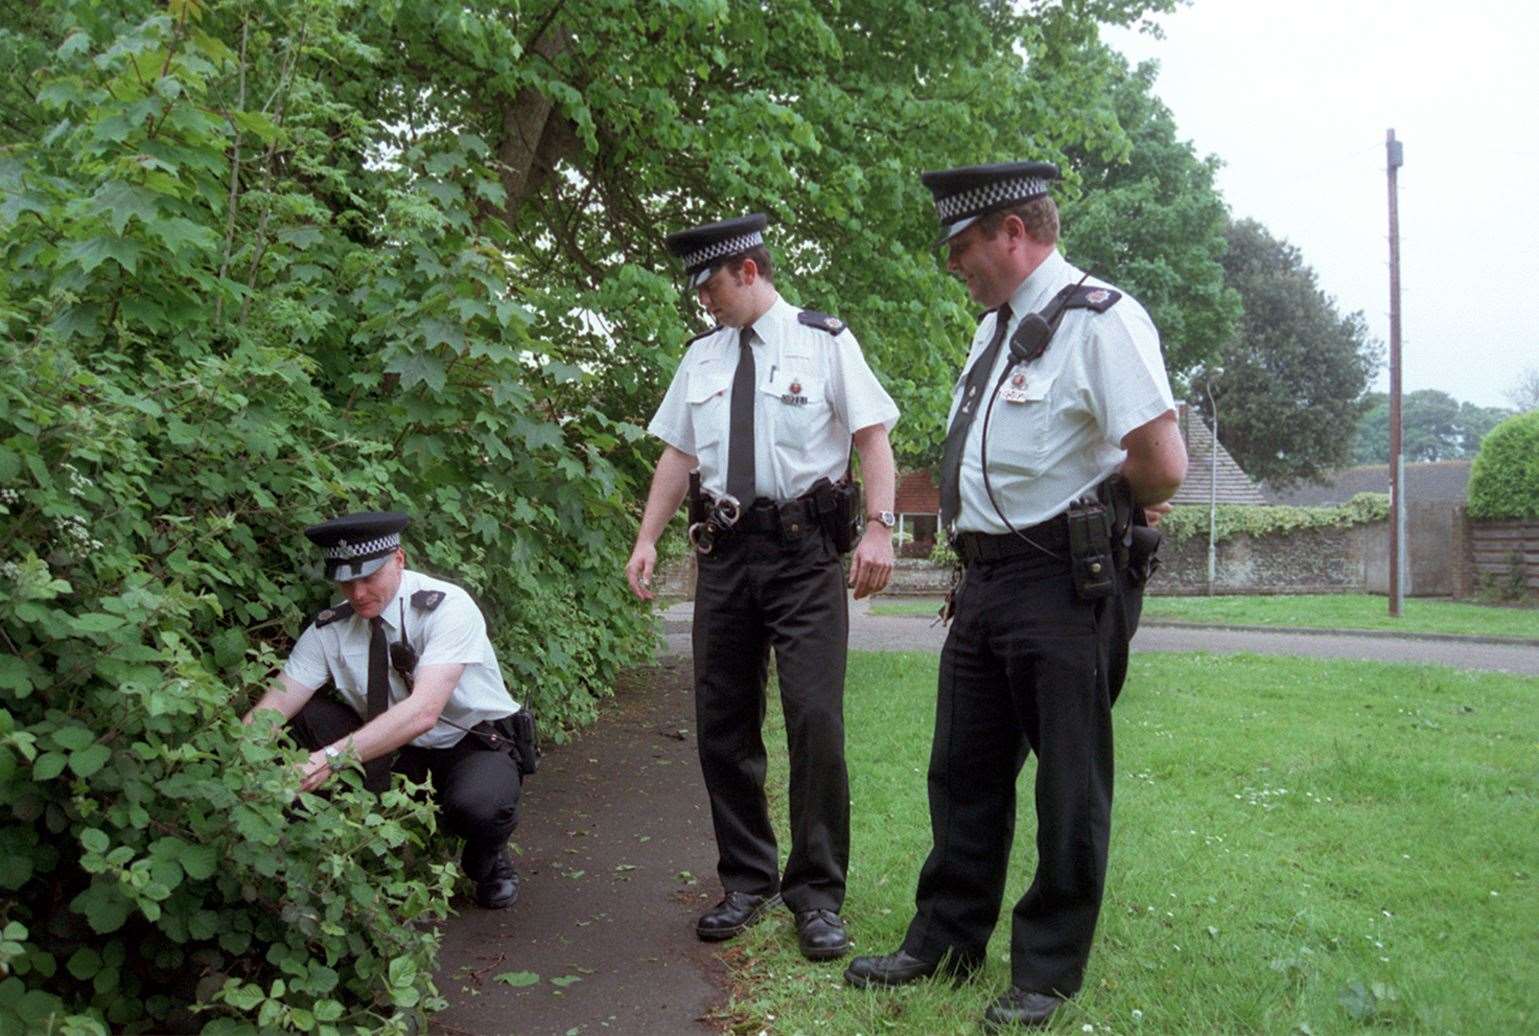 The police search after Mrs Griggs' disappearance.